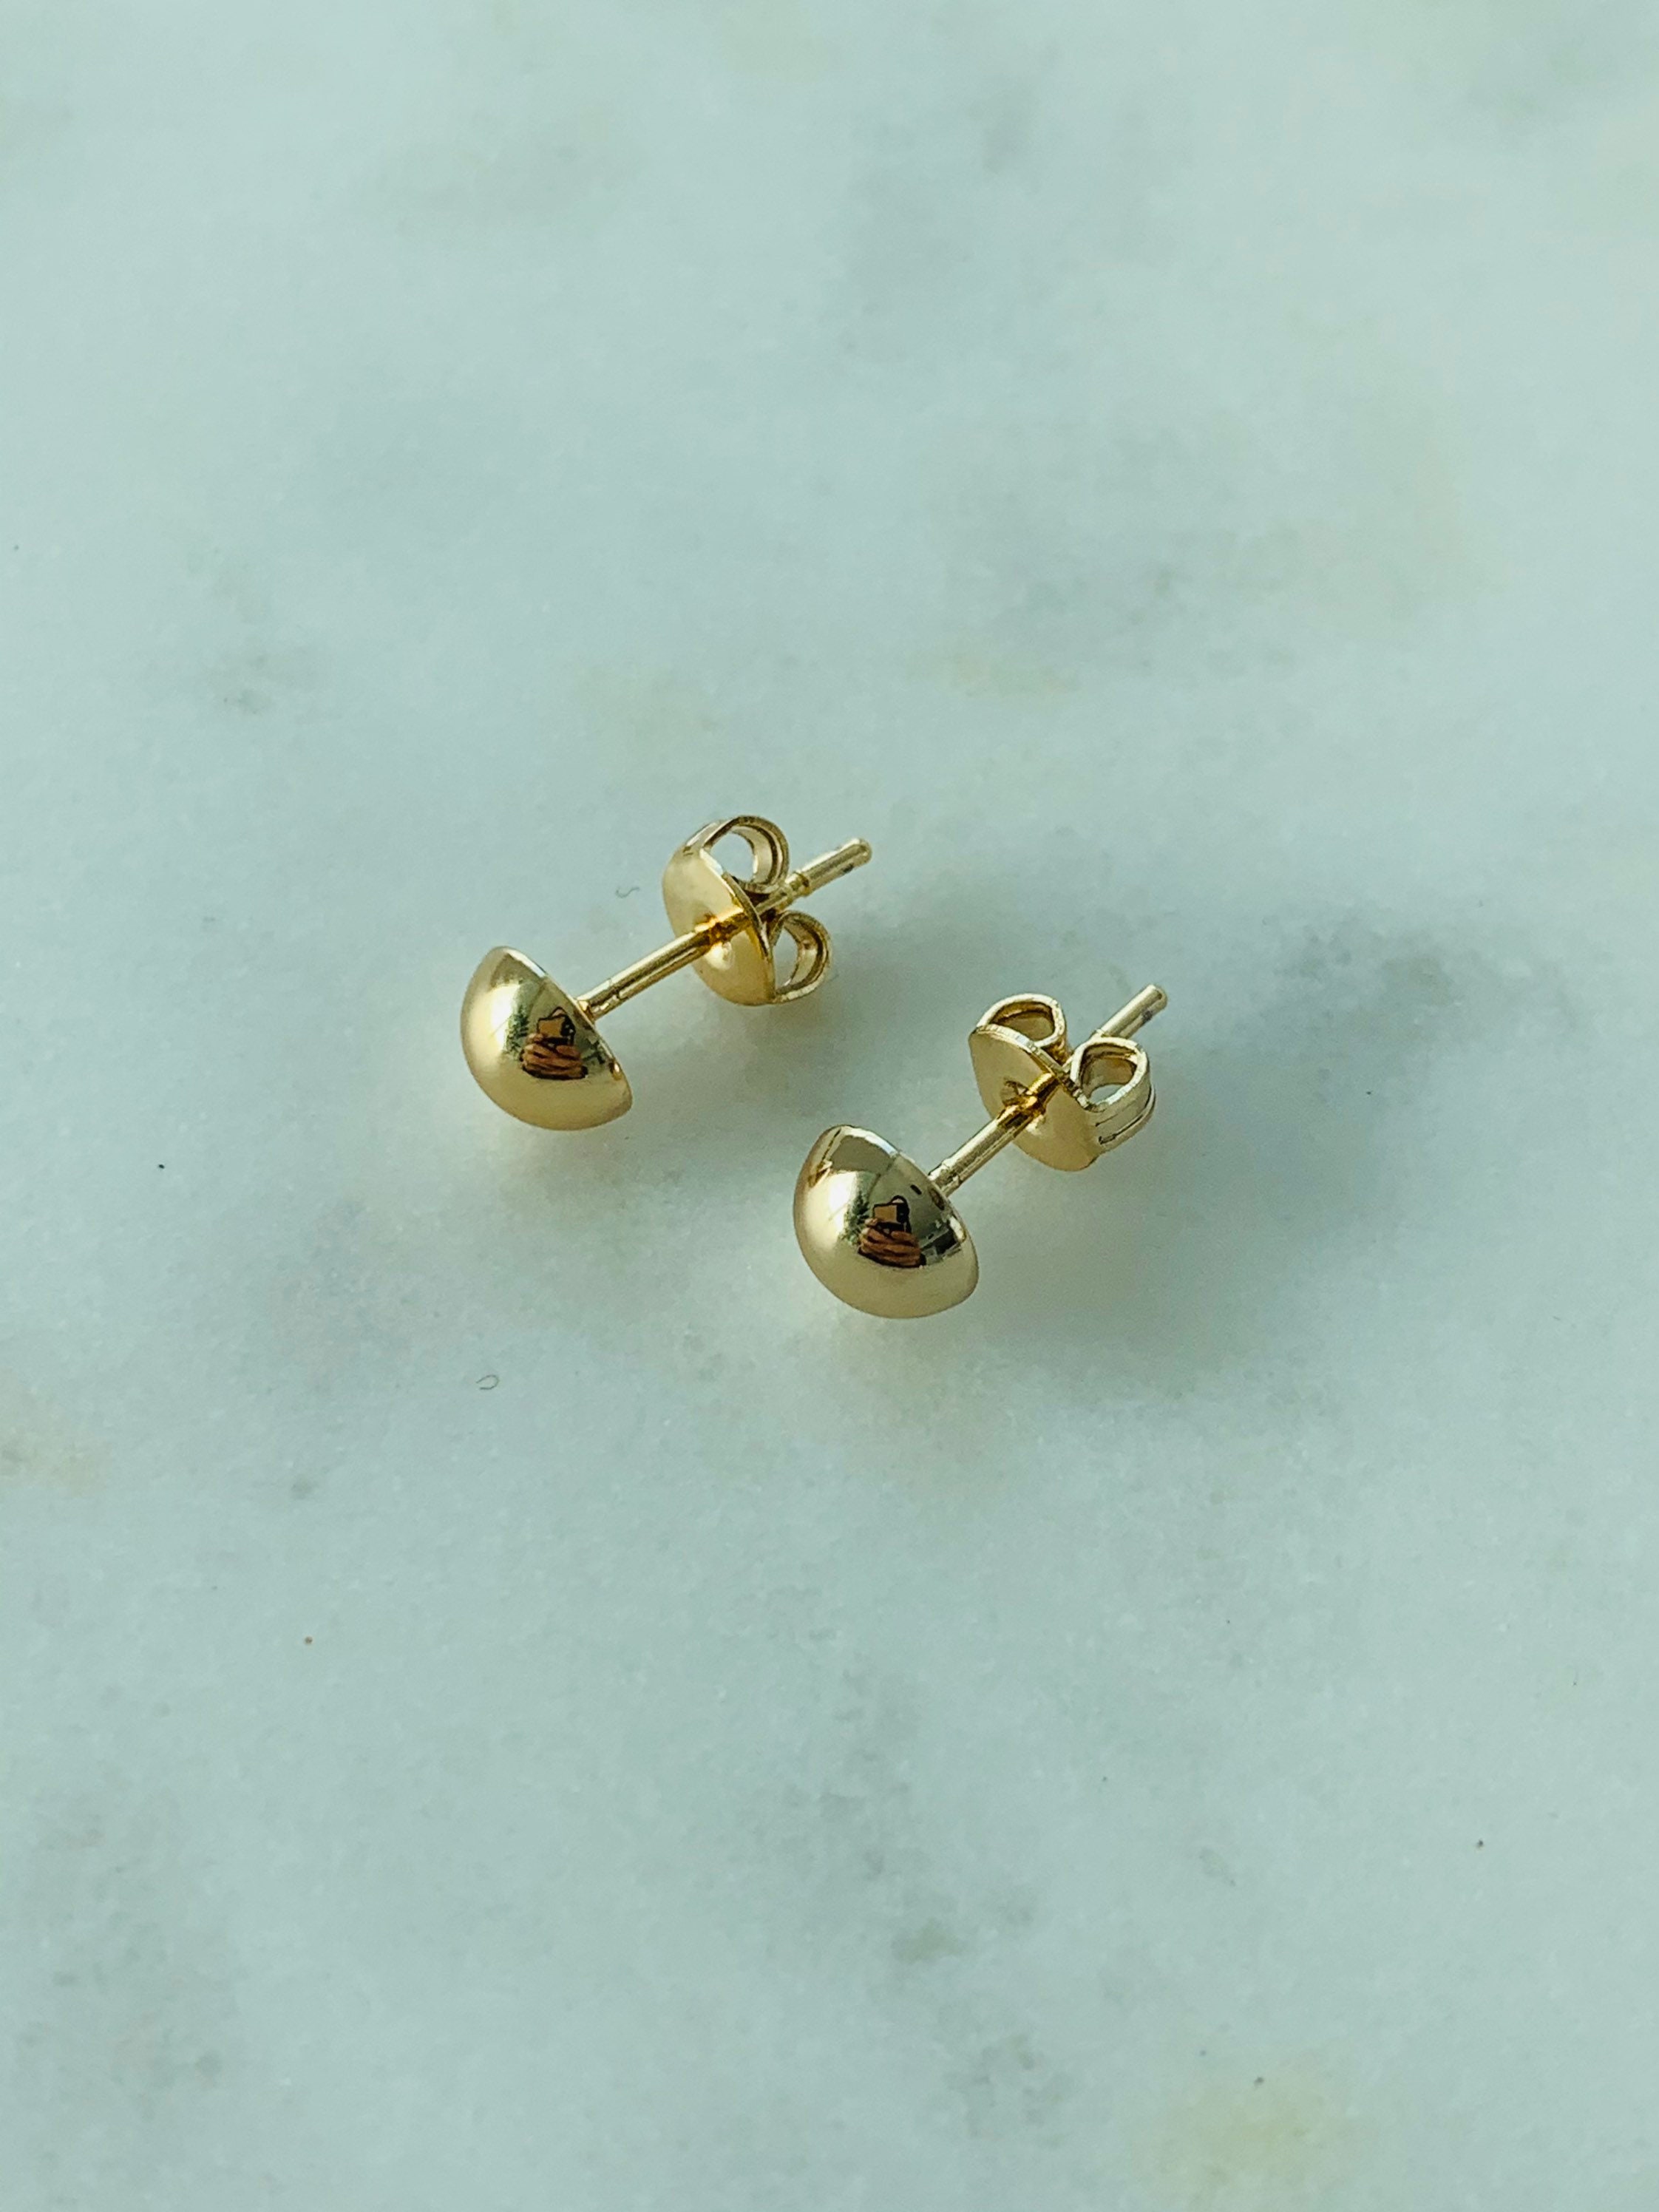 22ct Gold Round Stud Earring | PureJewels UK